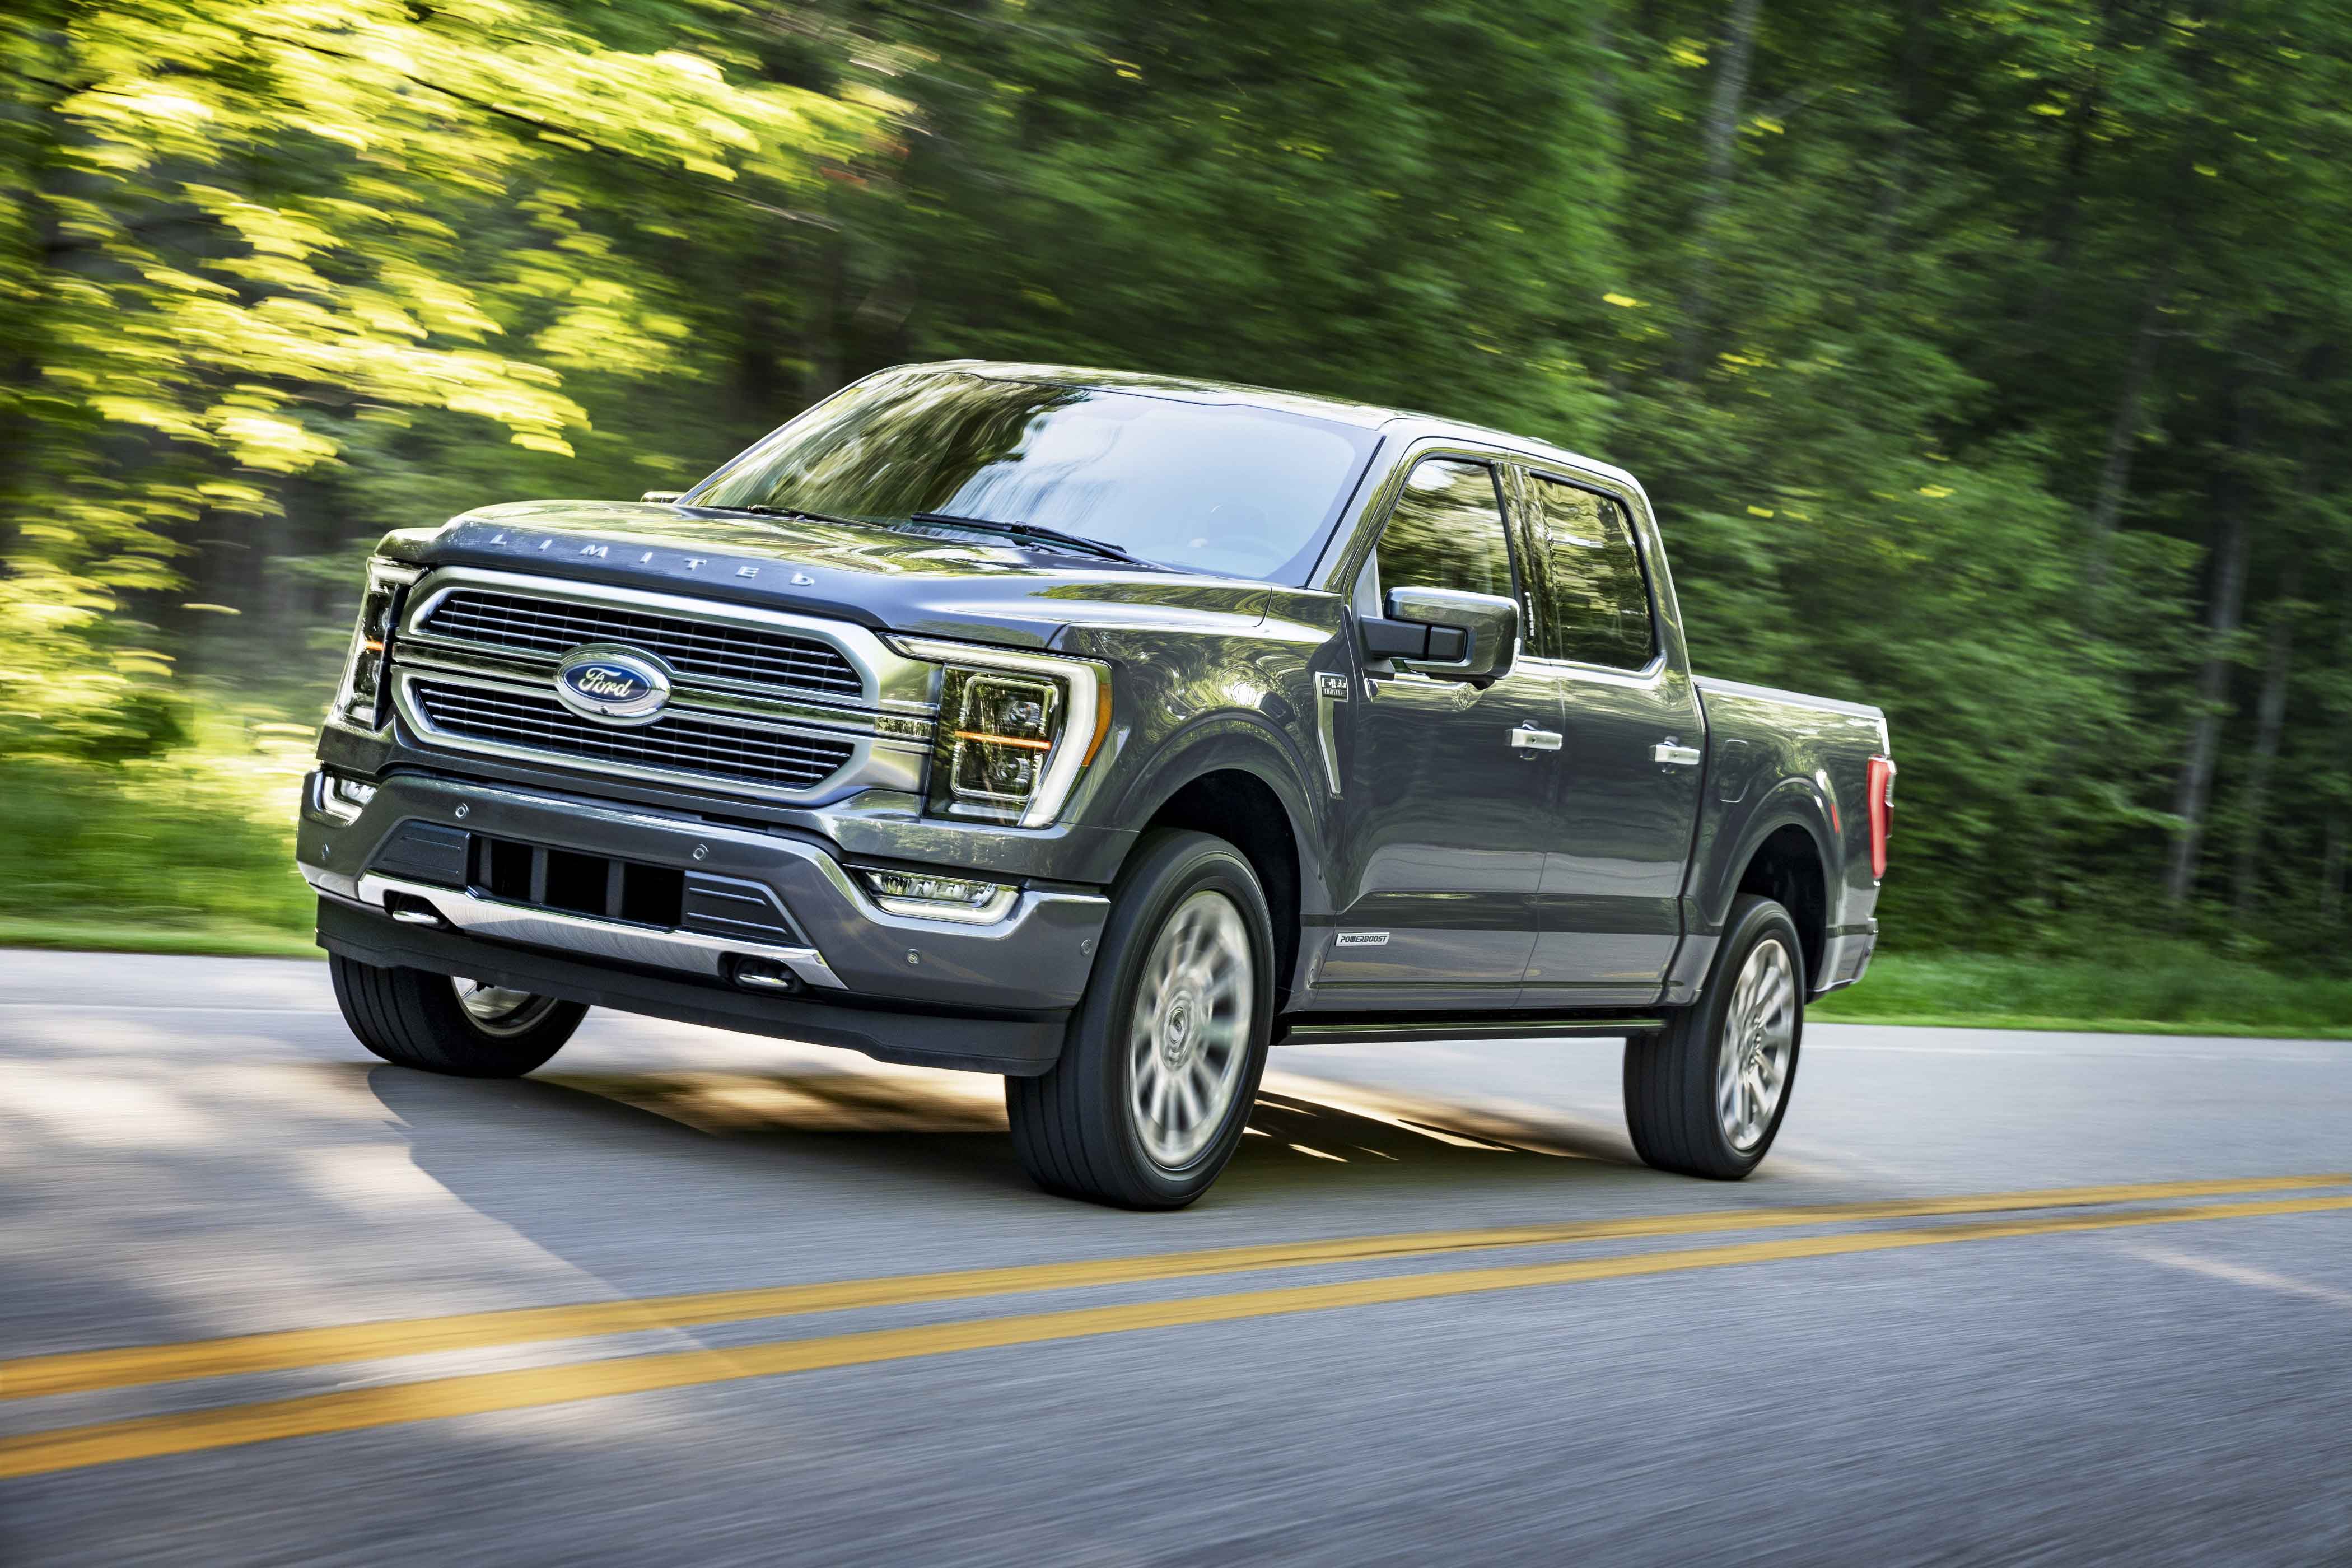 Ford F-150, Super Duty and Ranger Trucks Drive Sales Success in The Middle East